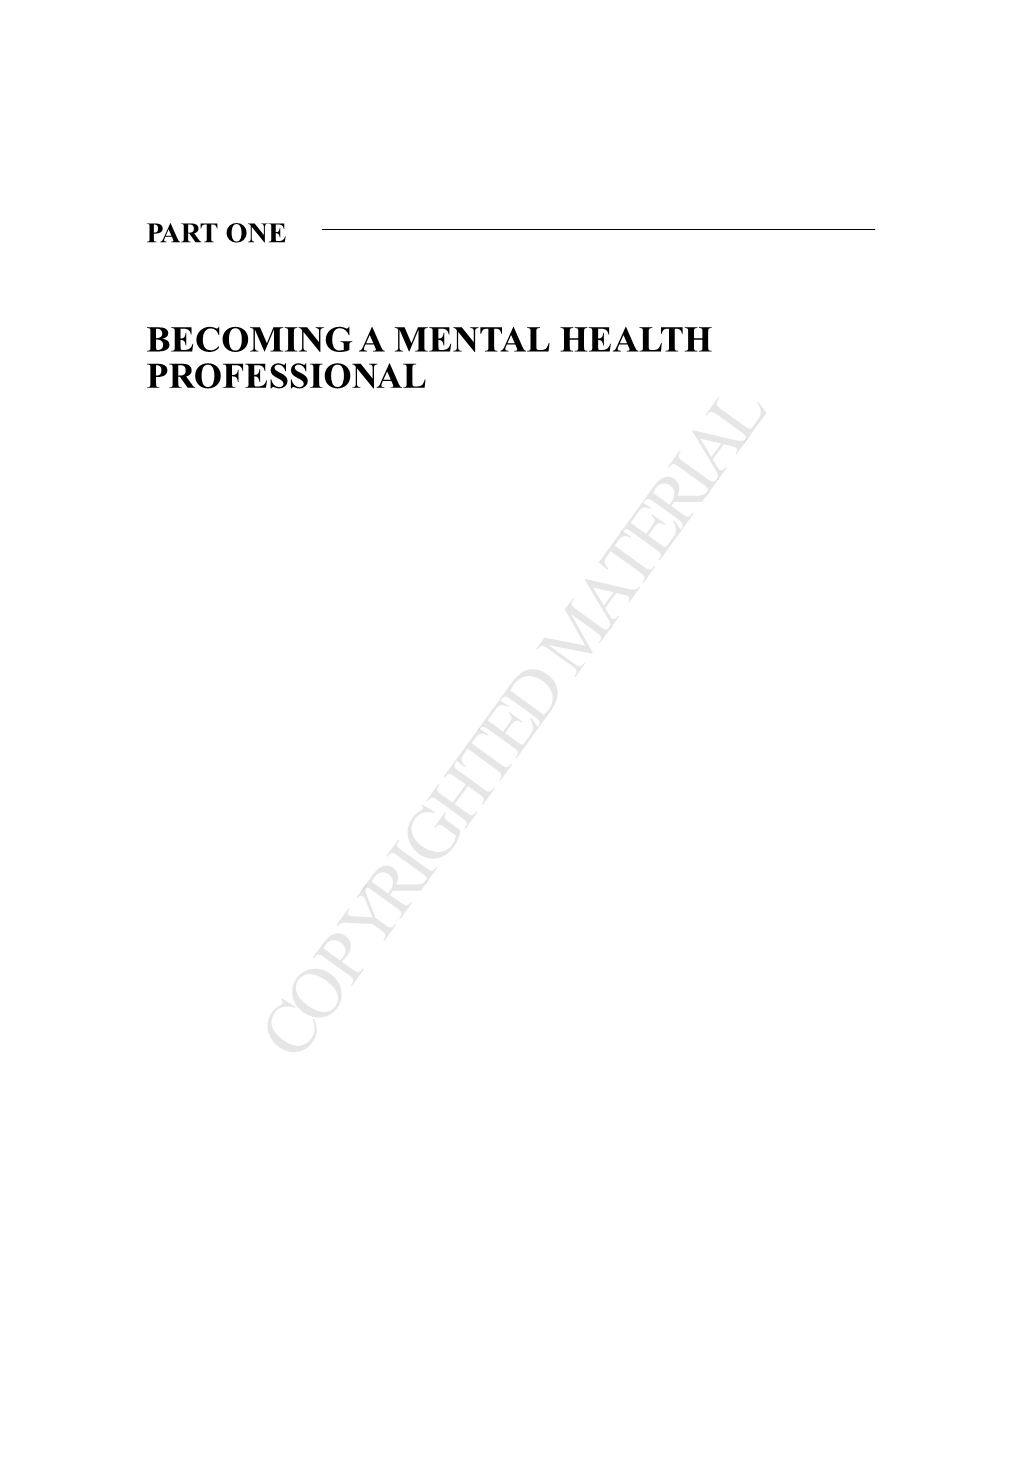 Becoming a Mental Health Professional